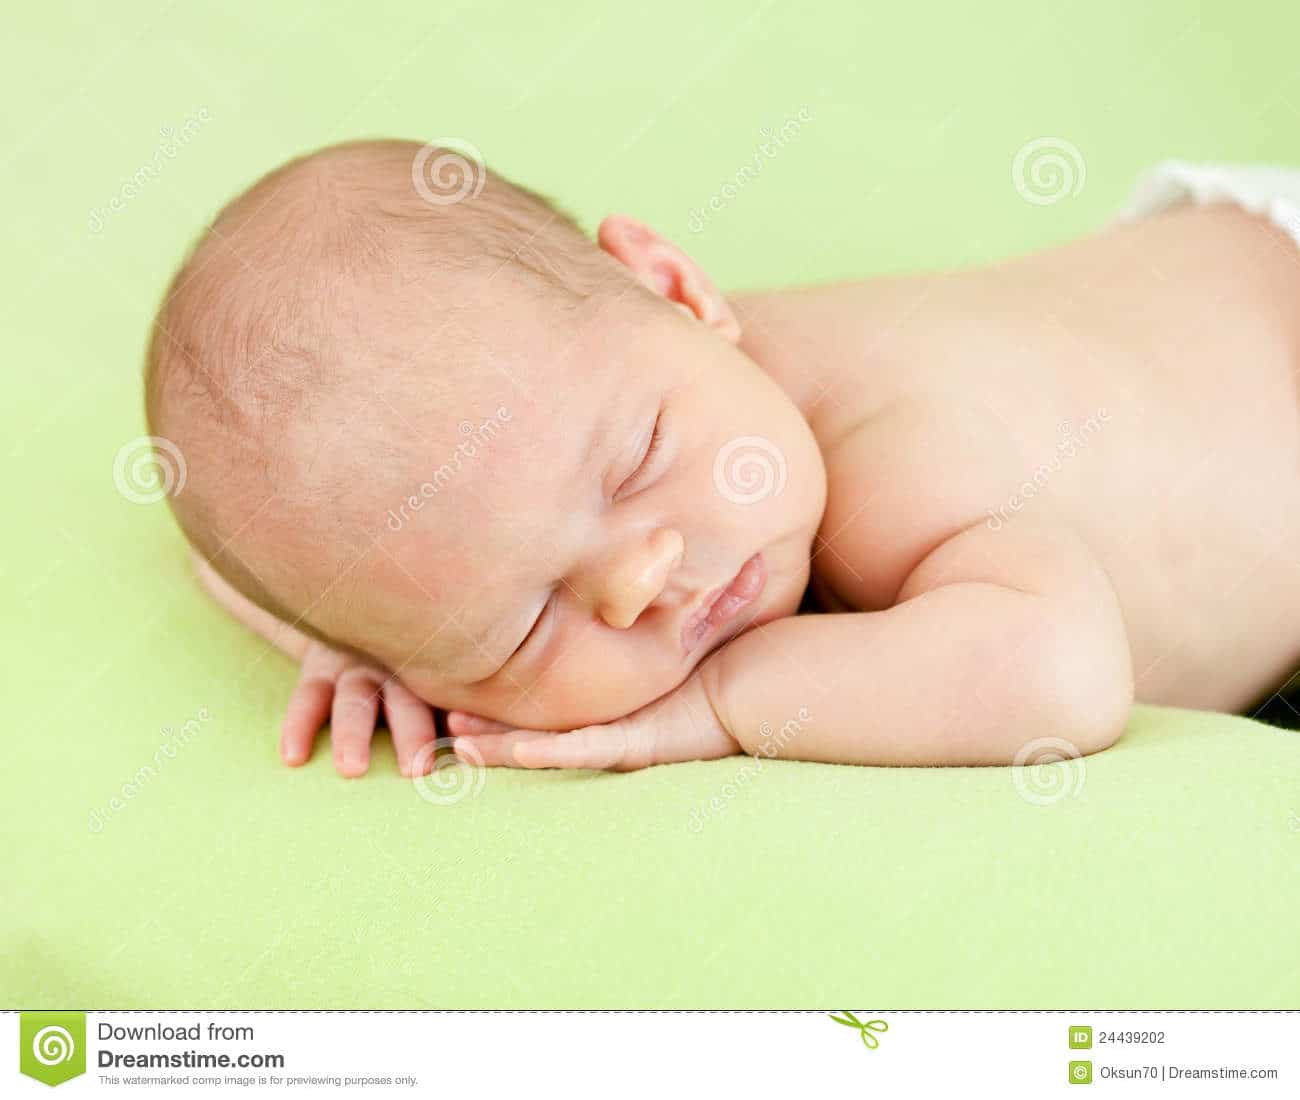 Adorable Baby Sleeping On Stomach Stock Photo